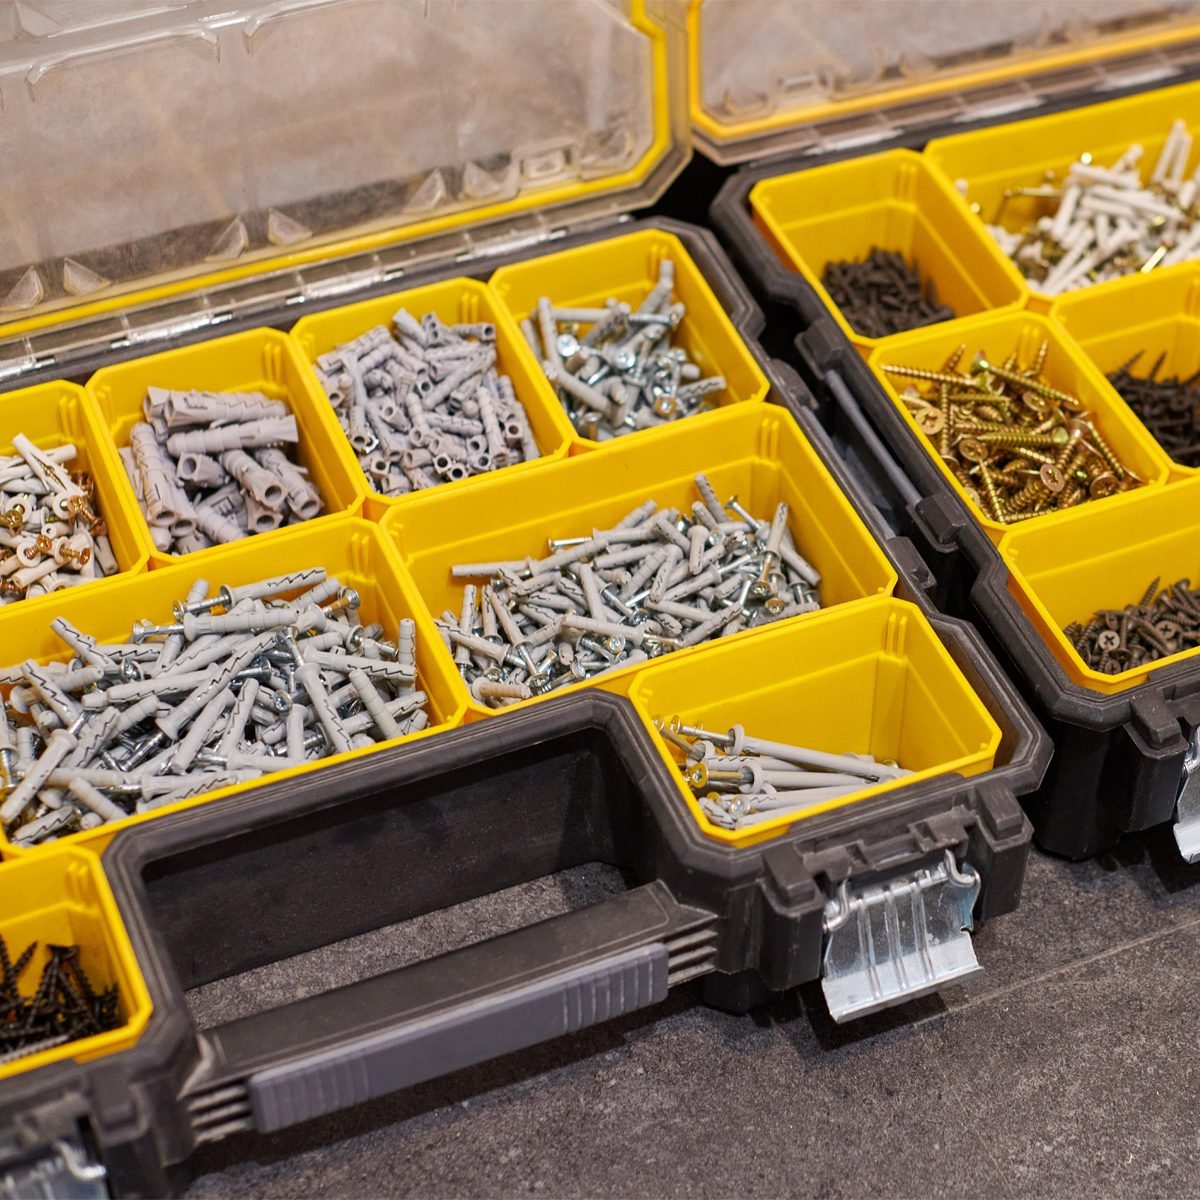 5 Hardware Organizers for Extra Storage in Your Workshop or Craft Room